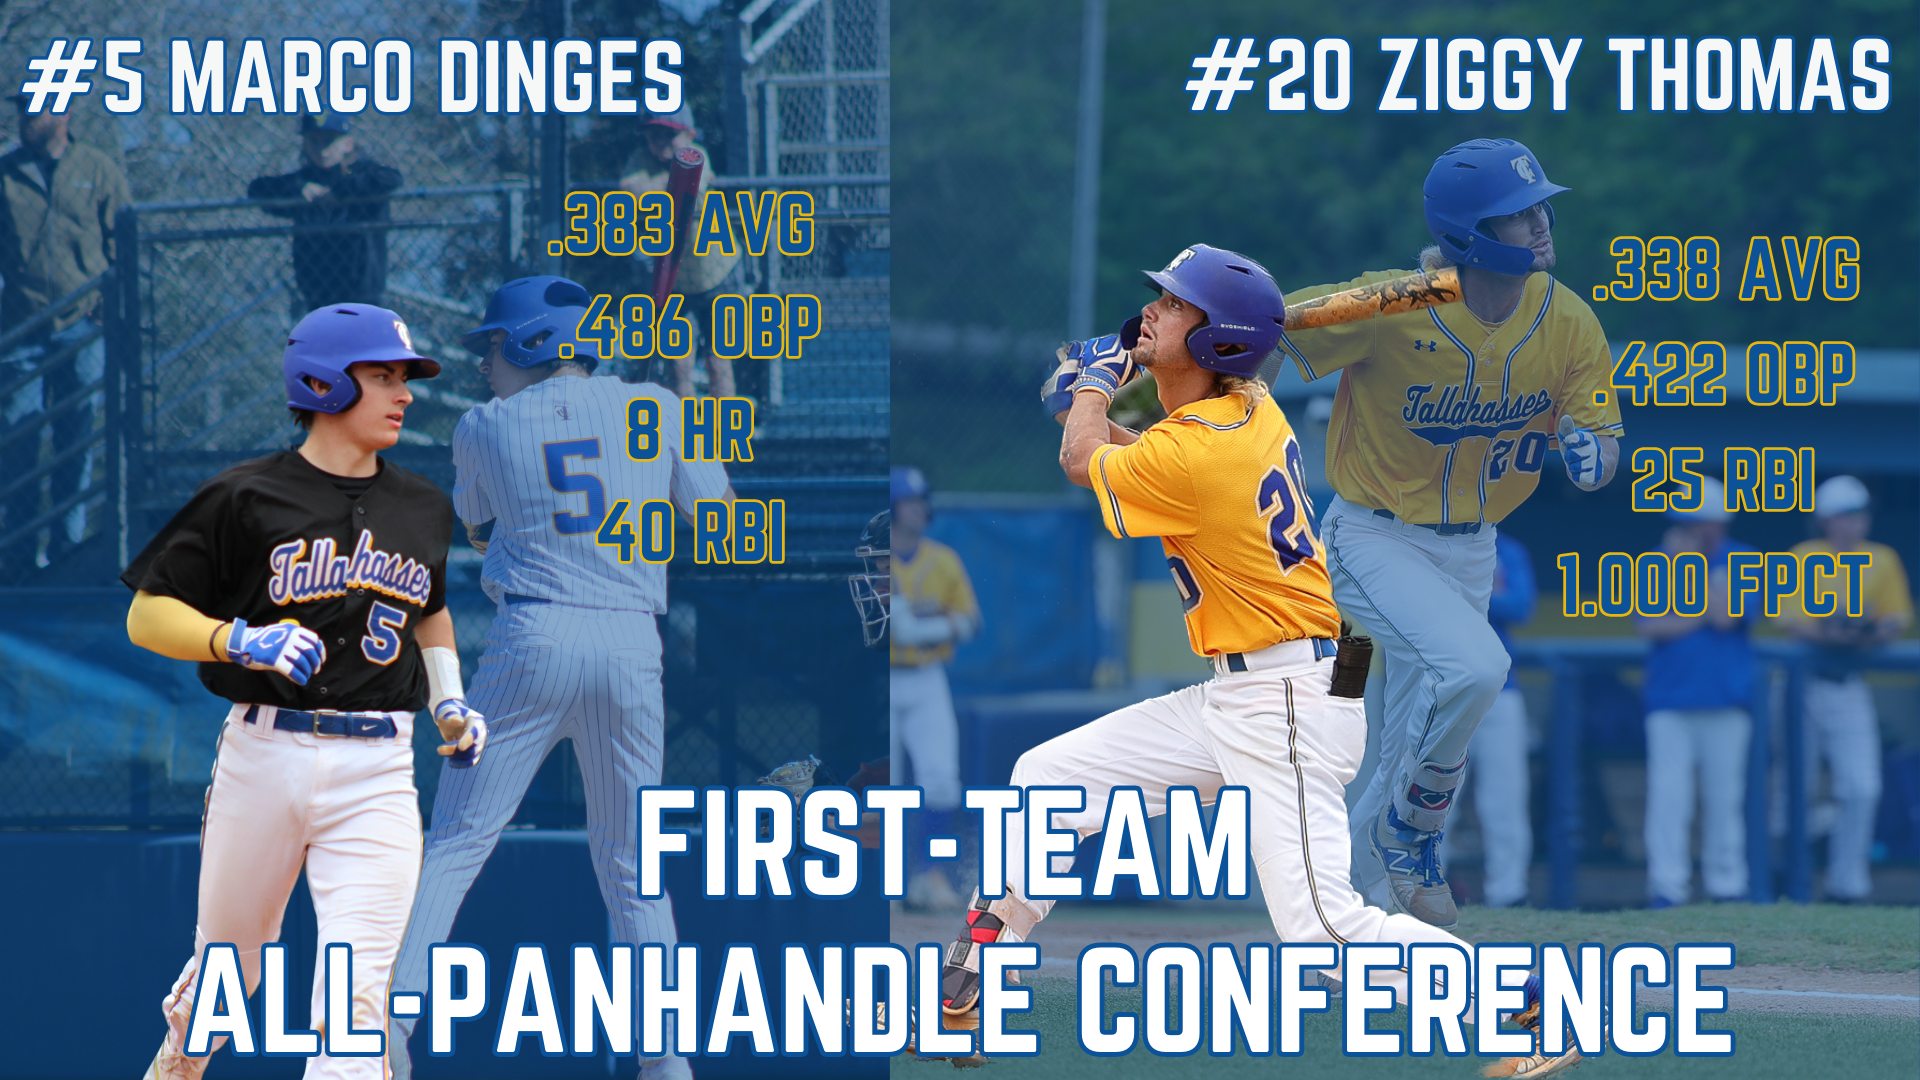 Four TCC Baseball players receive All-Panhandle Conference honors